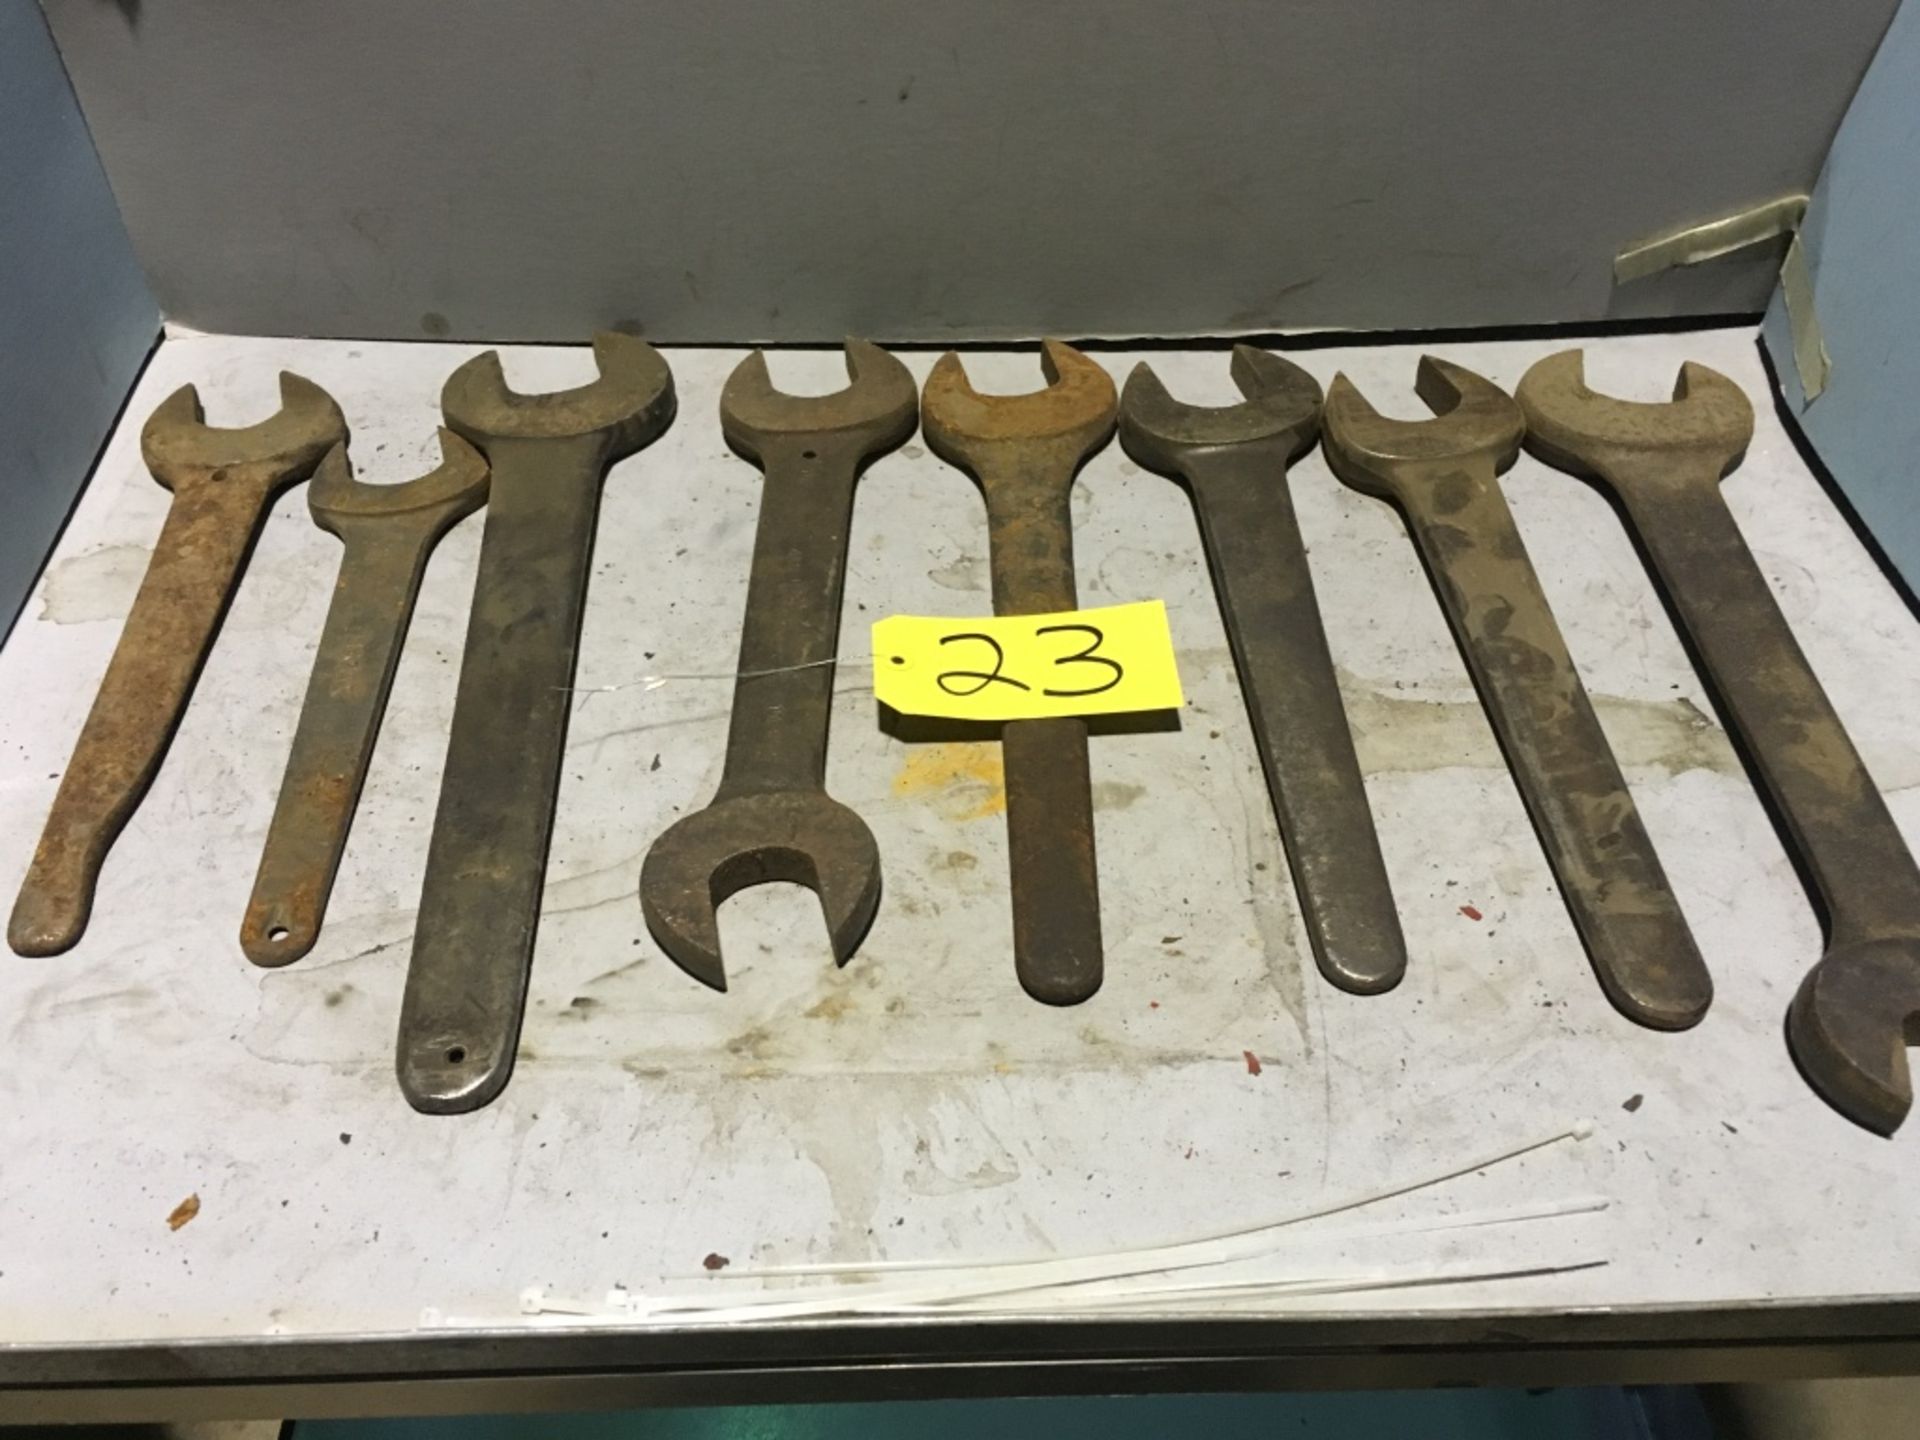 Approximately (8), assorted open end wrenches.